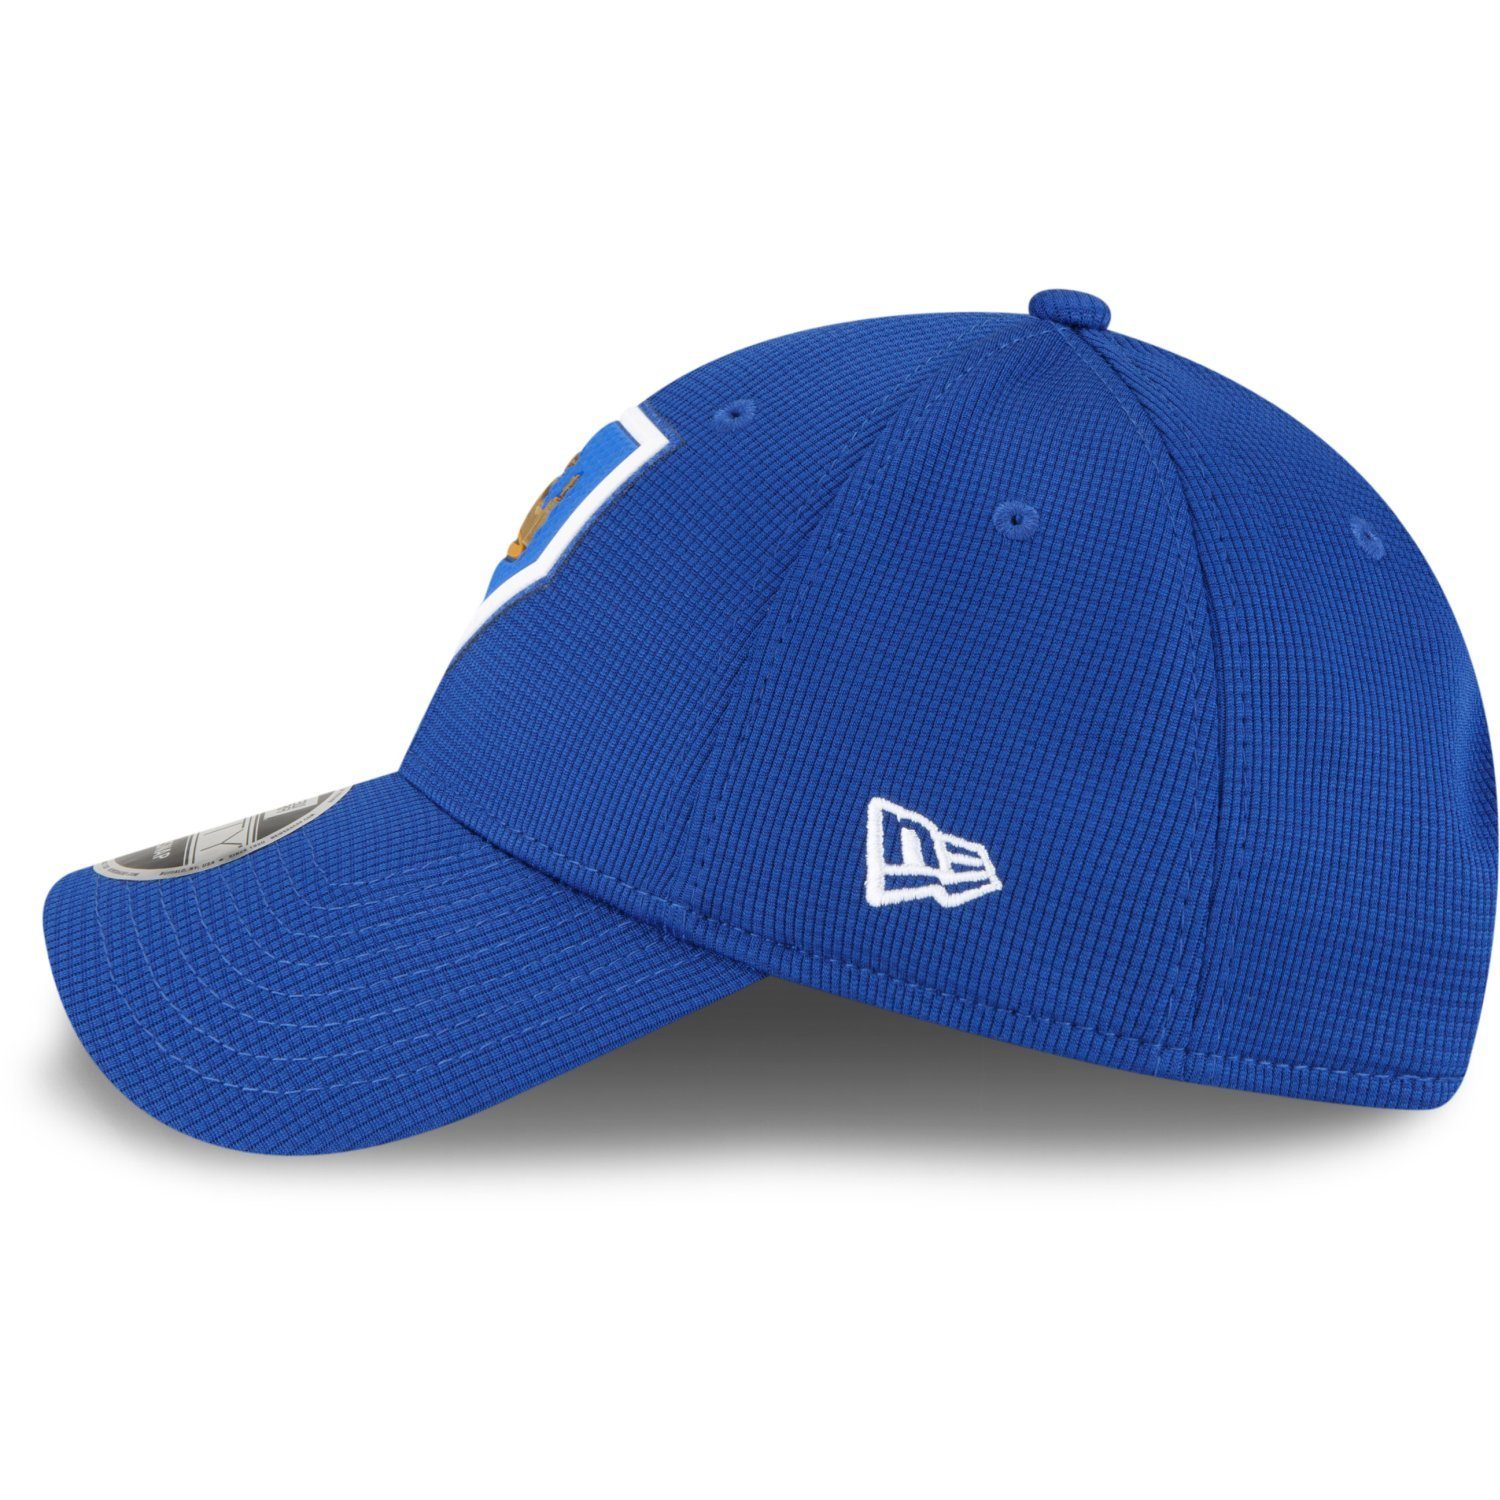 Fitted City 2022 Kansas MLB Cap StretchFit Era 9FORTY Royals CLUBHOUSE New